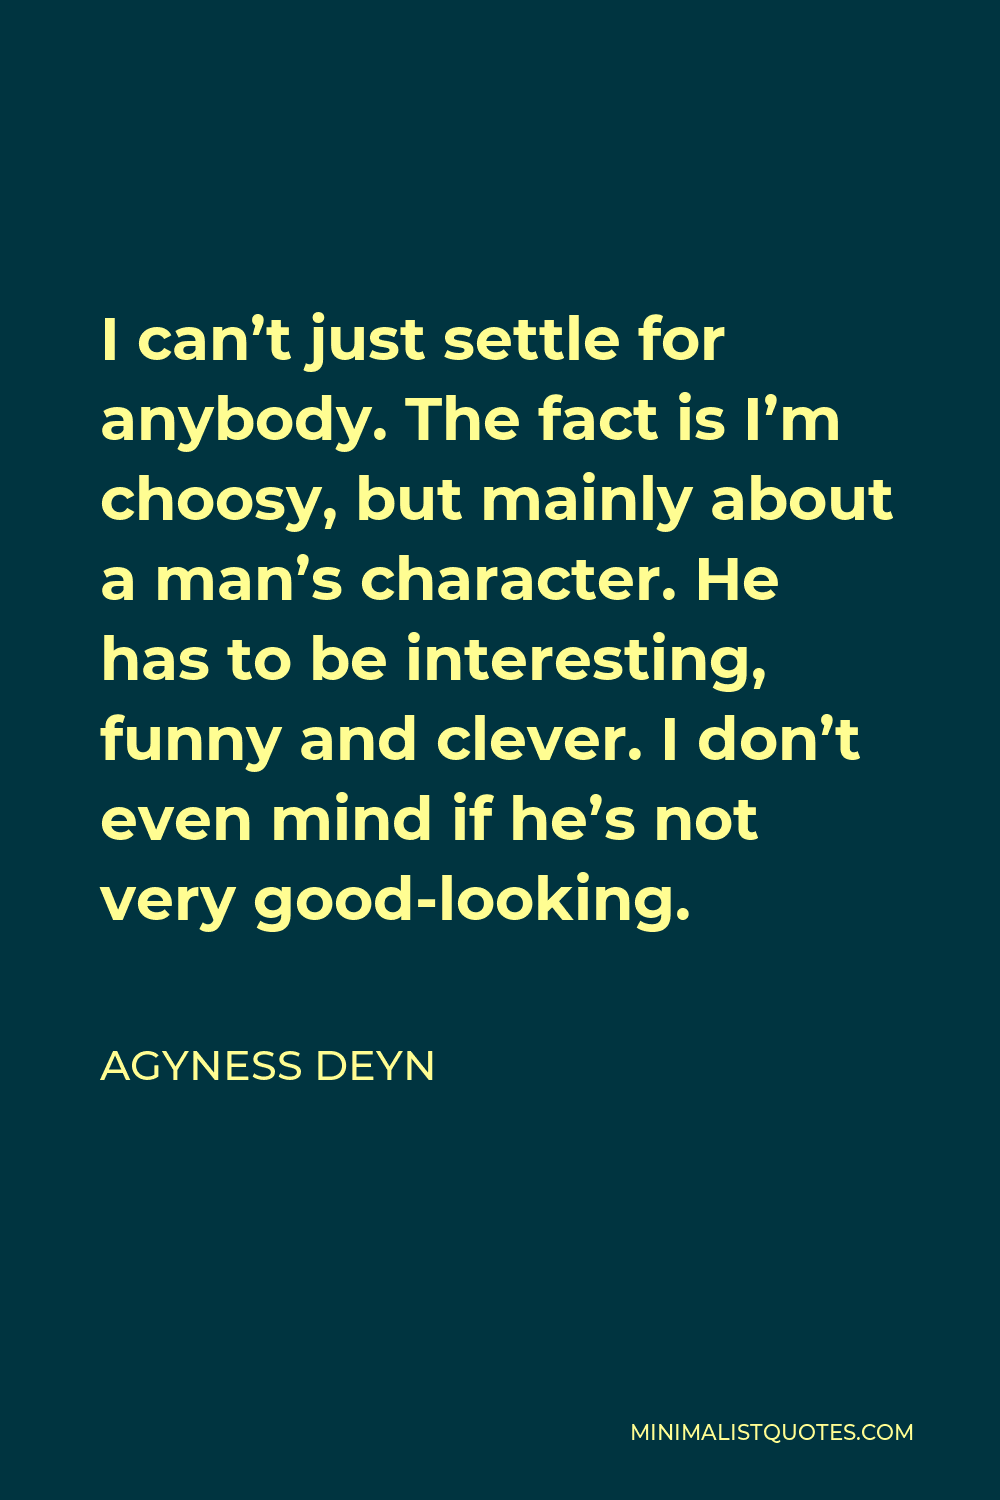 Agyness Deyn Quote - I can’t just settle for anybody. The fact is I’m choosy, but mainly about a man’s character. He has to be interesting, funny and clever. I don’t even mind if he’s not very good-looking.